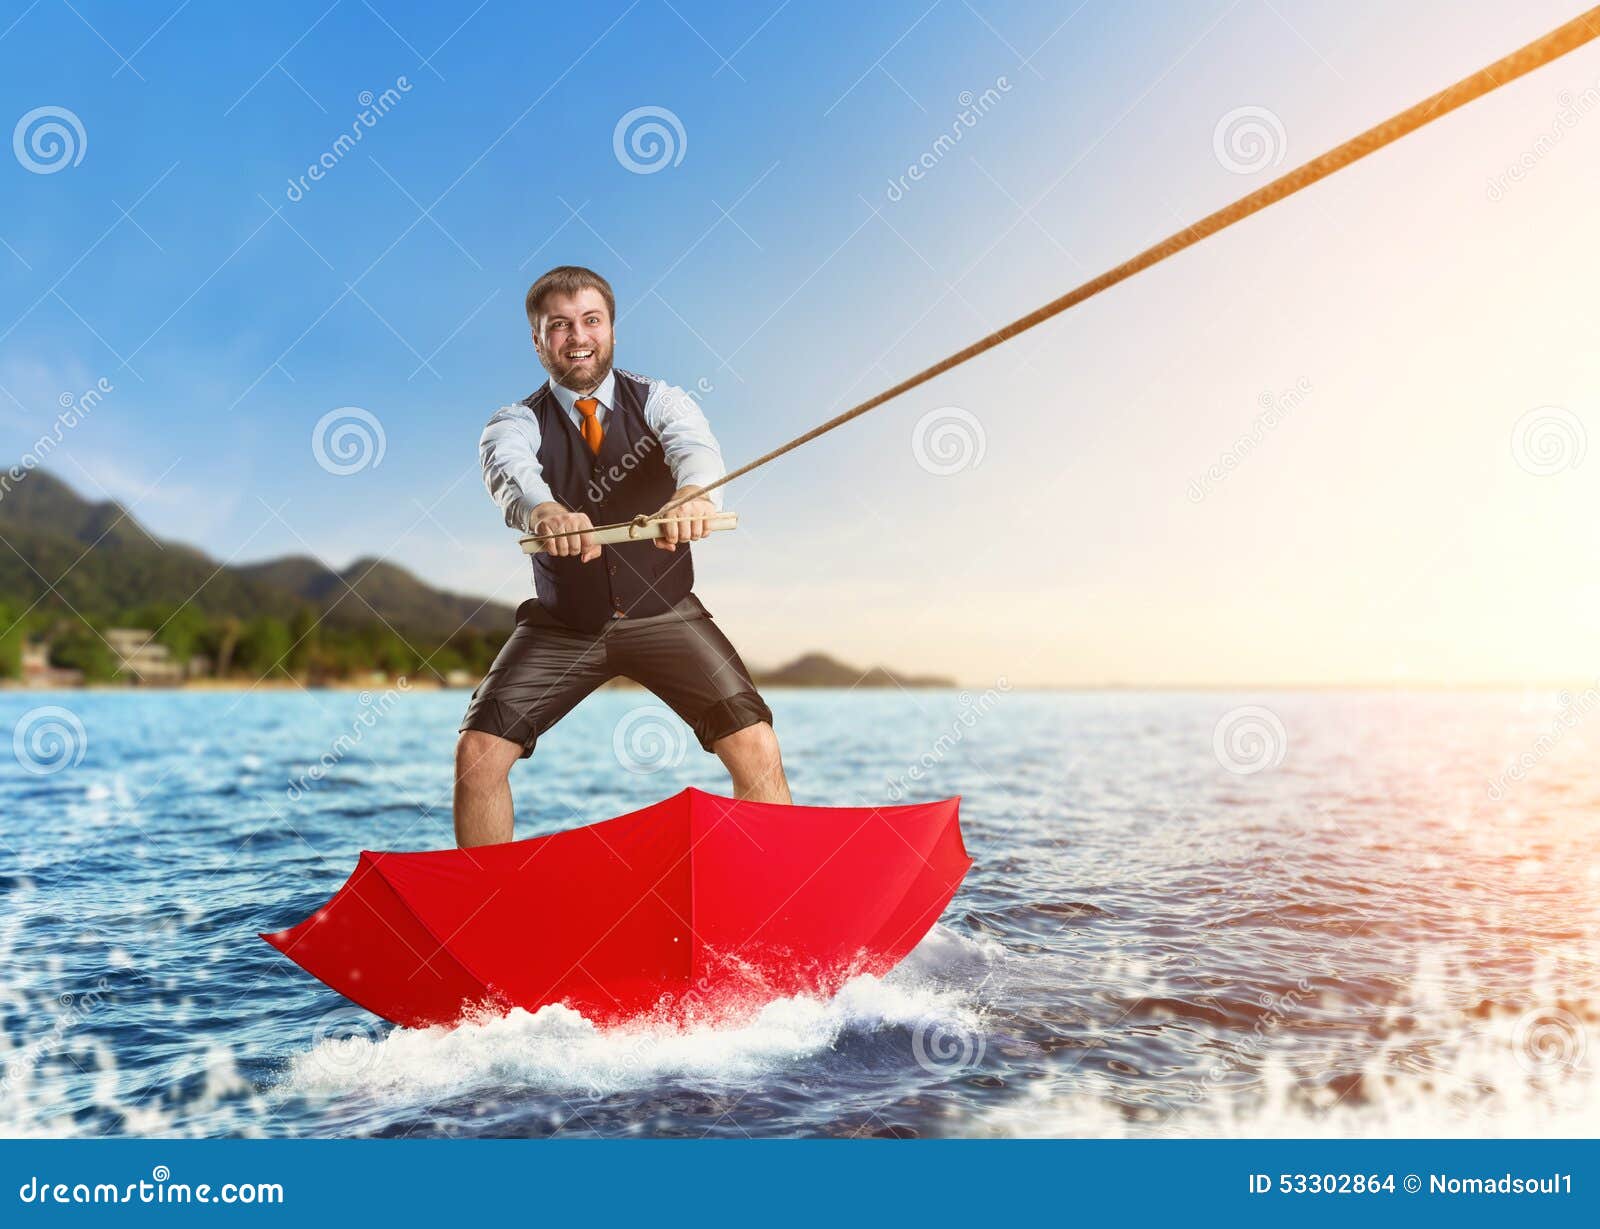 Businessman on Water Skis in Umbrella Stock Photo - Image of corporate ...